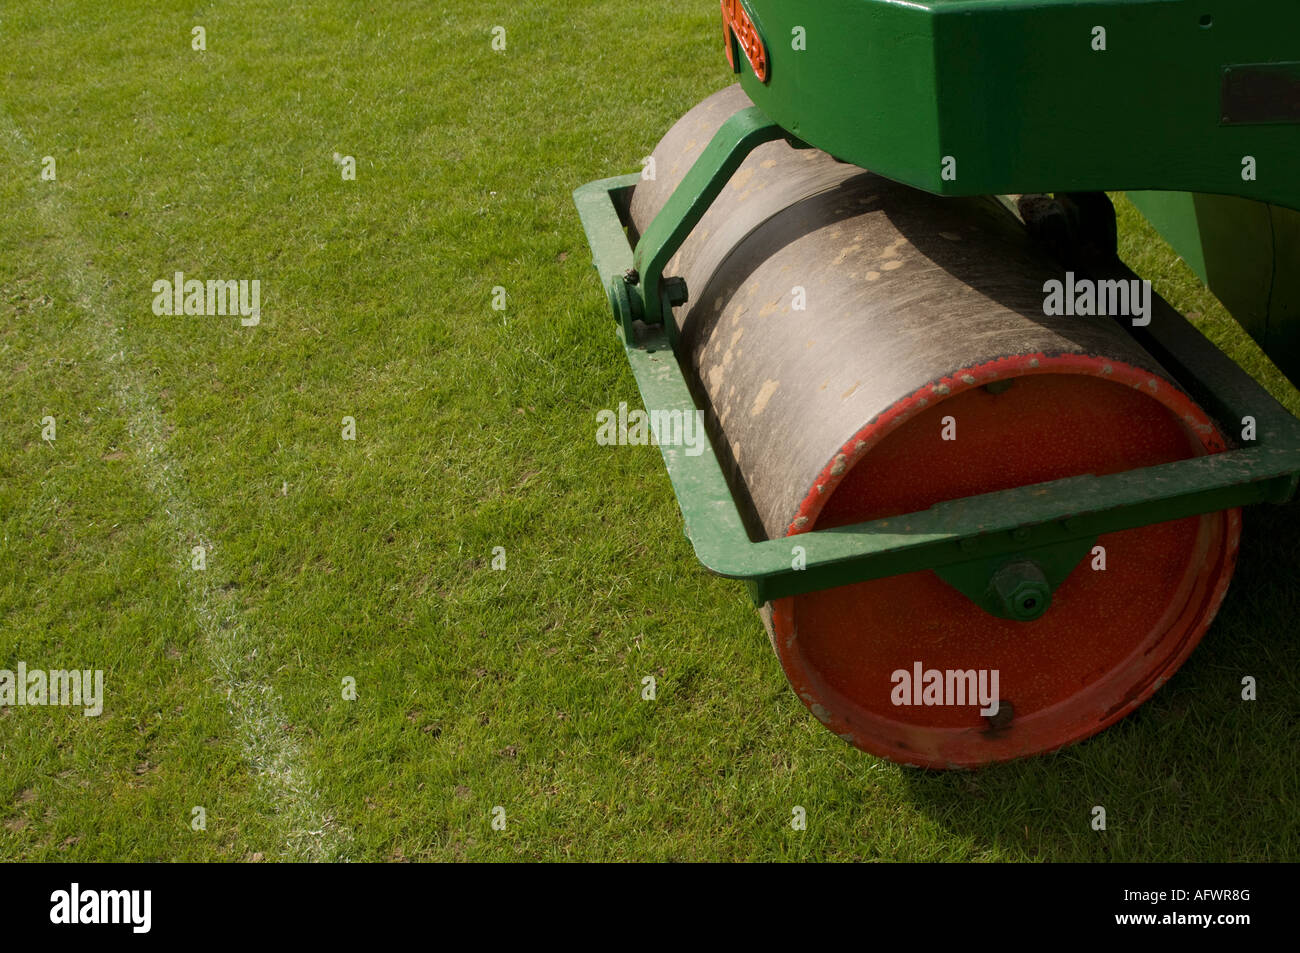 Heavy steel roller , tube shaped, for flattening cricket pitch Stock Photo